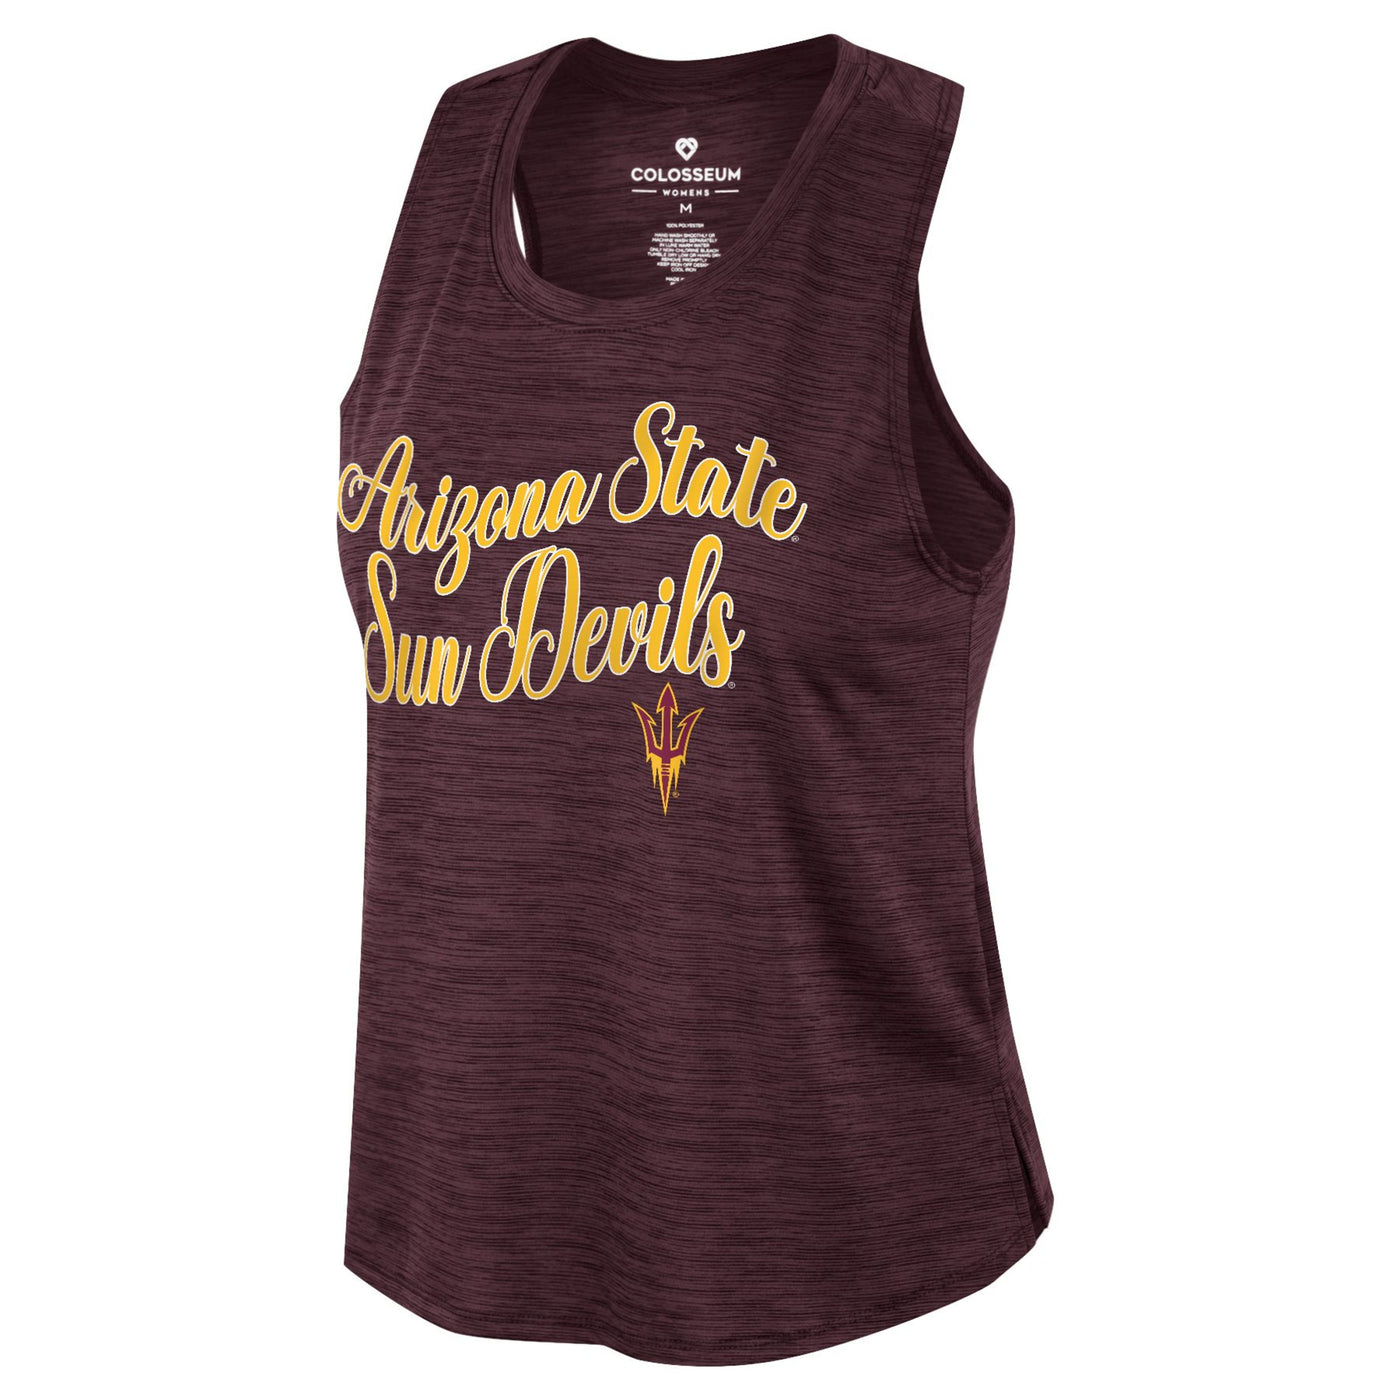 ASU heather maroon women's tank with 'Arizona State Sun Devils' lettering above a pitchfork